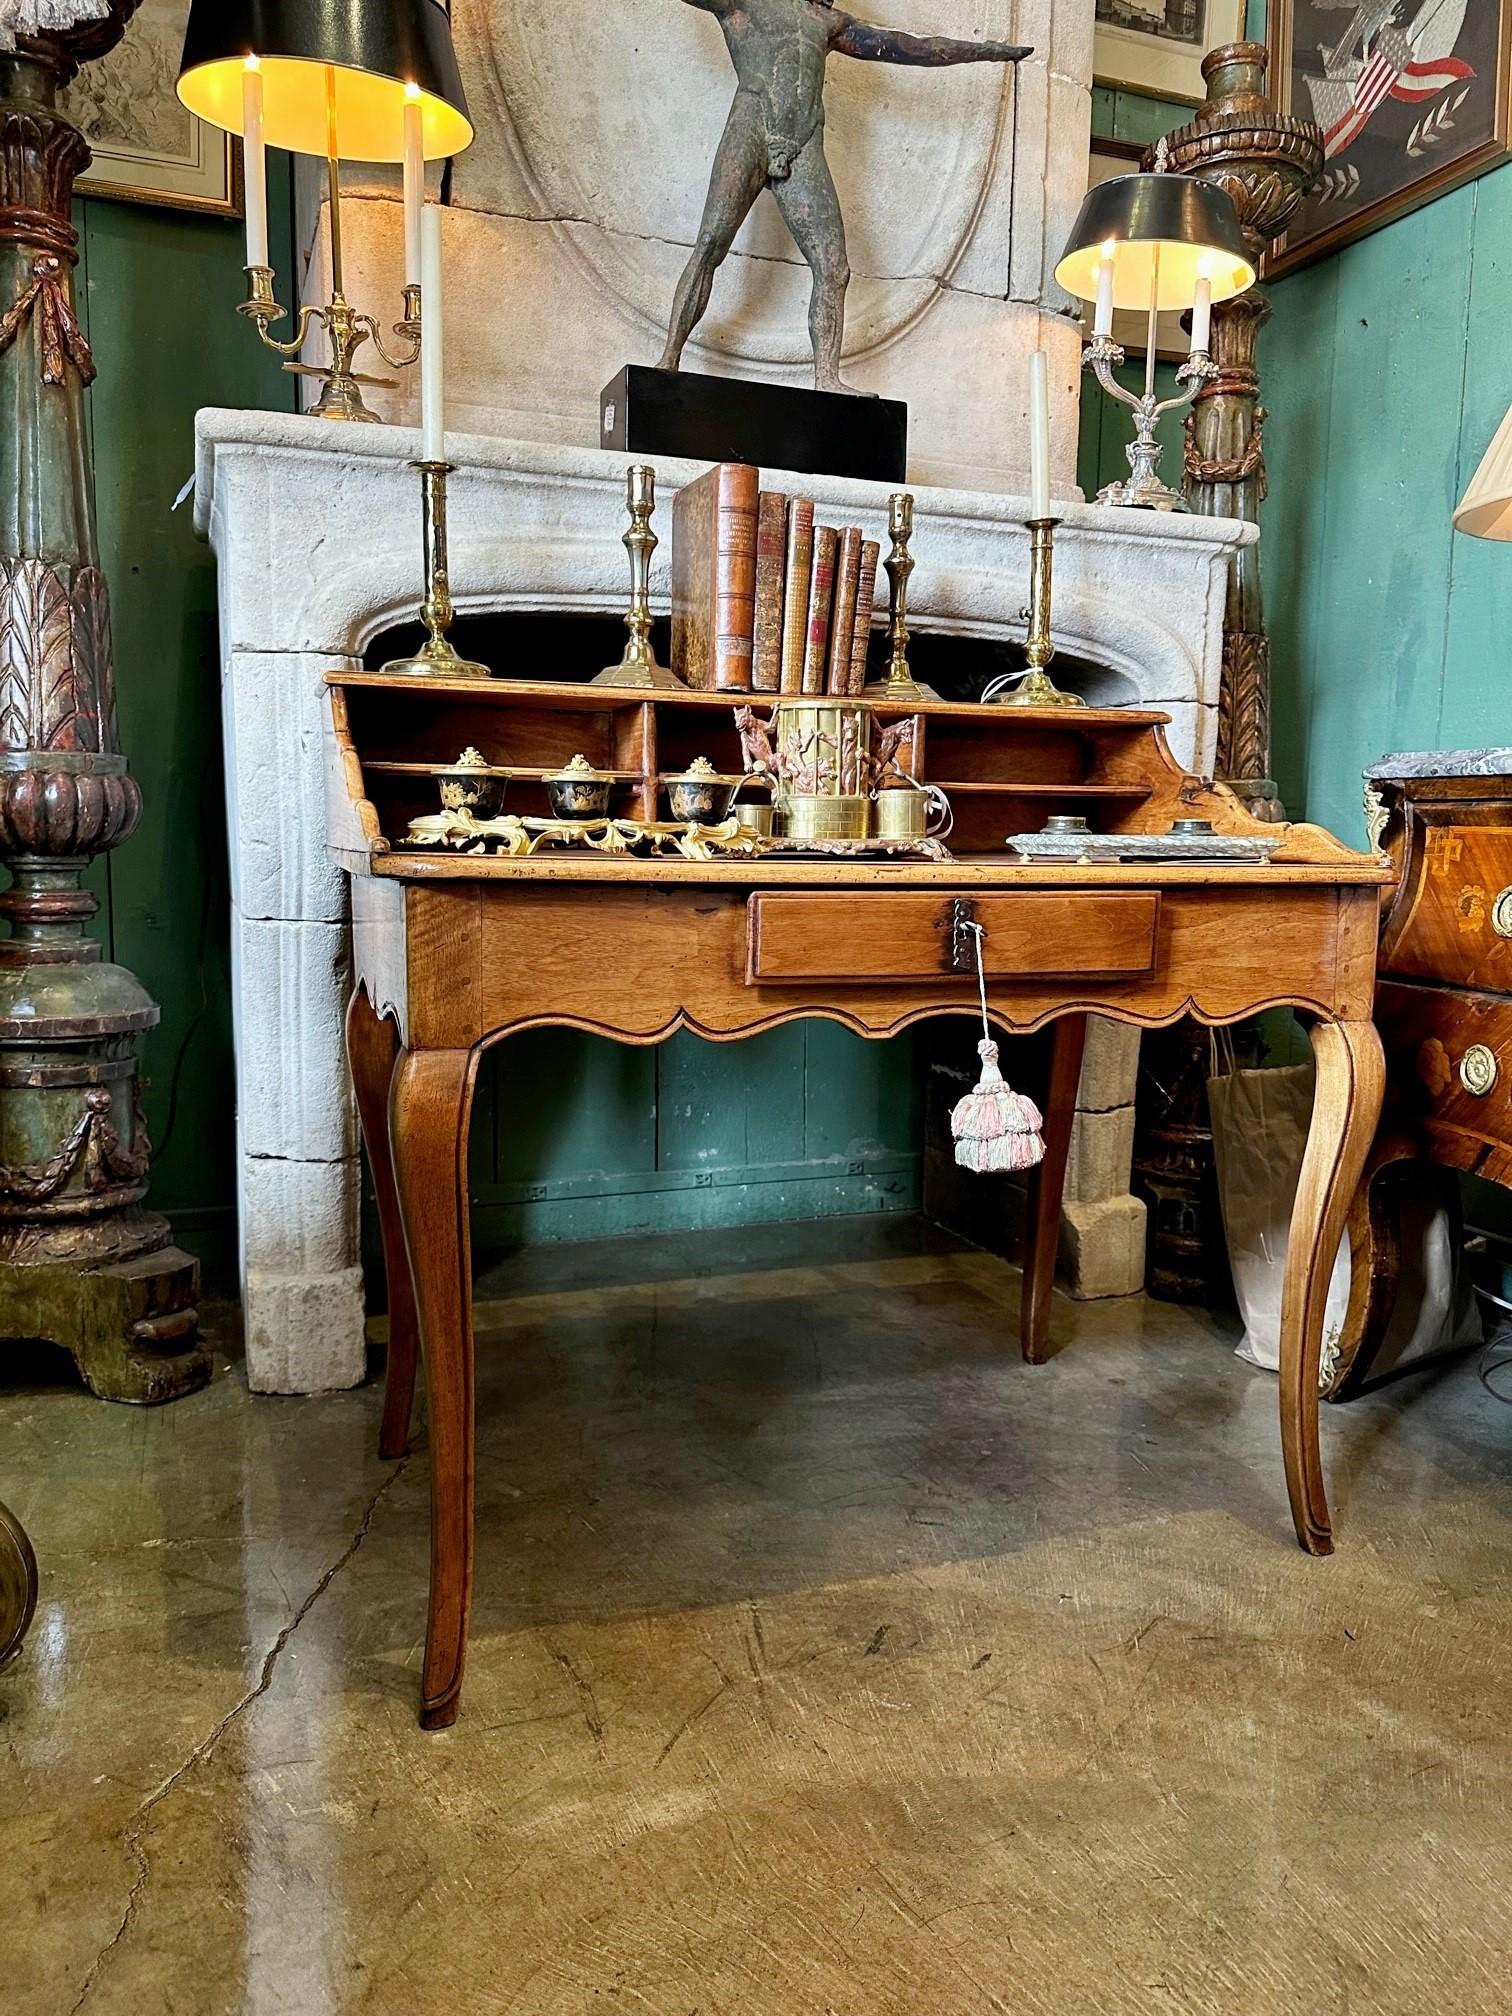 Antique Bureau Desk in Walnut Cartonnier Writing office Table Provencal Rustic . An exquisite French Provencal antique campagne Campaign High-end Countryside writing bureau in good condition and quality . warm Blond walnut wood . Rising from elegant